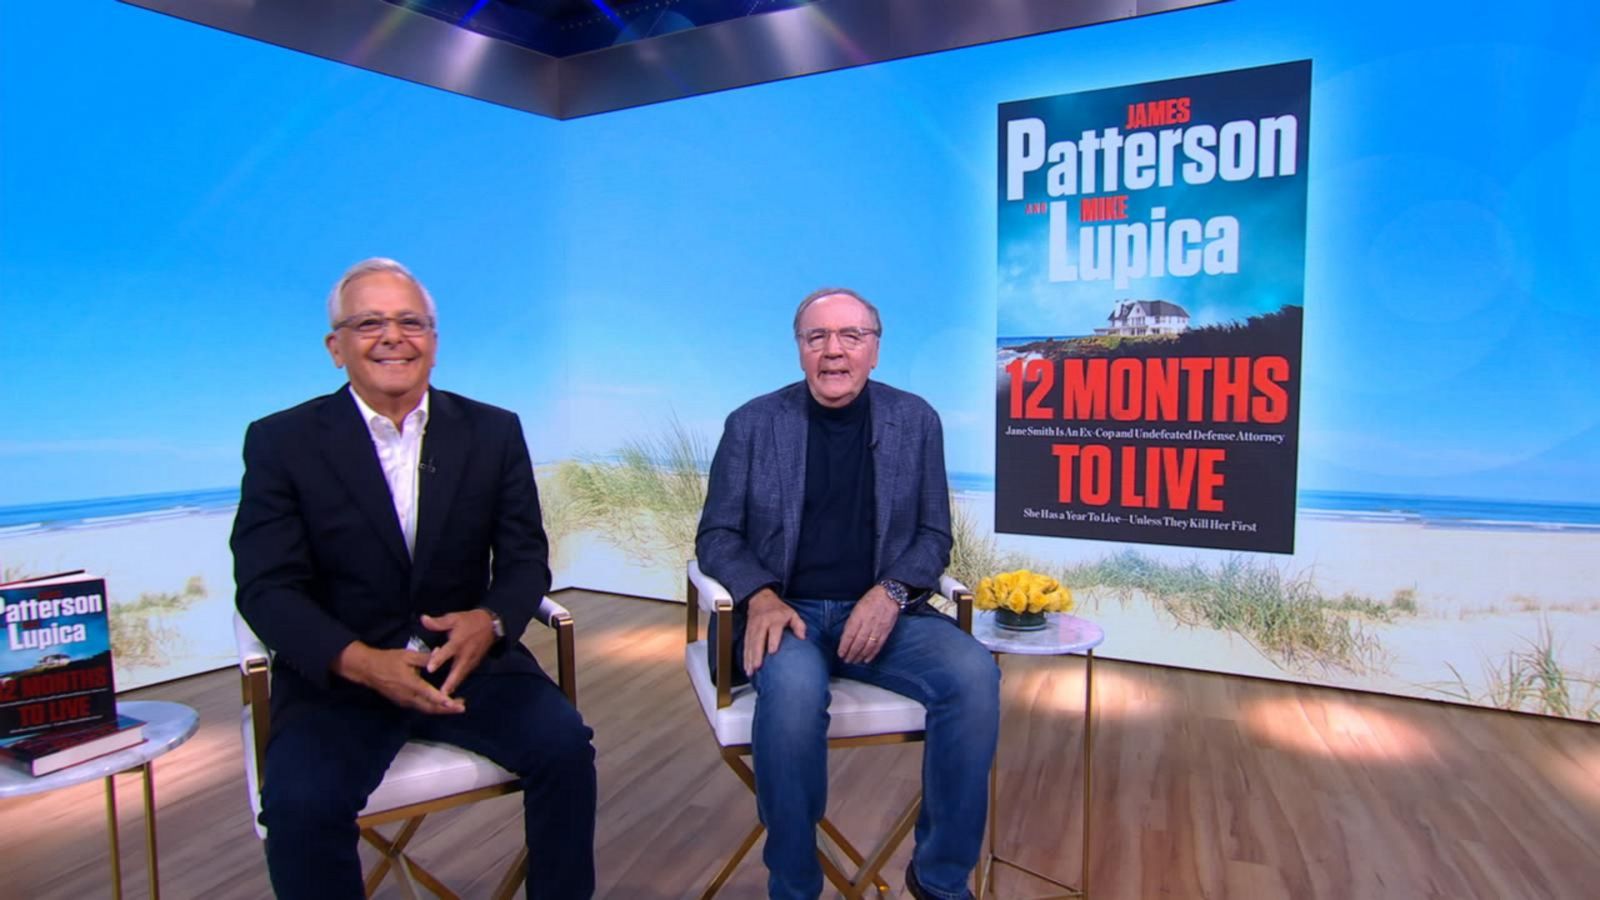 James Patterson's life adventures and personal stories revealed in new book